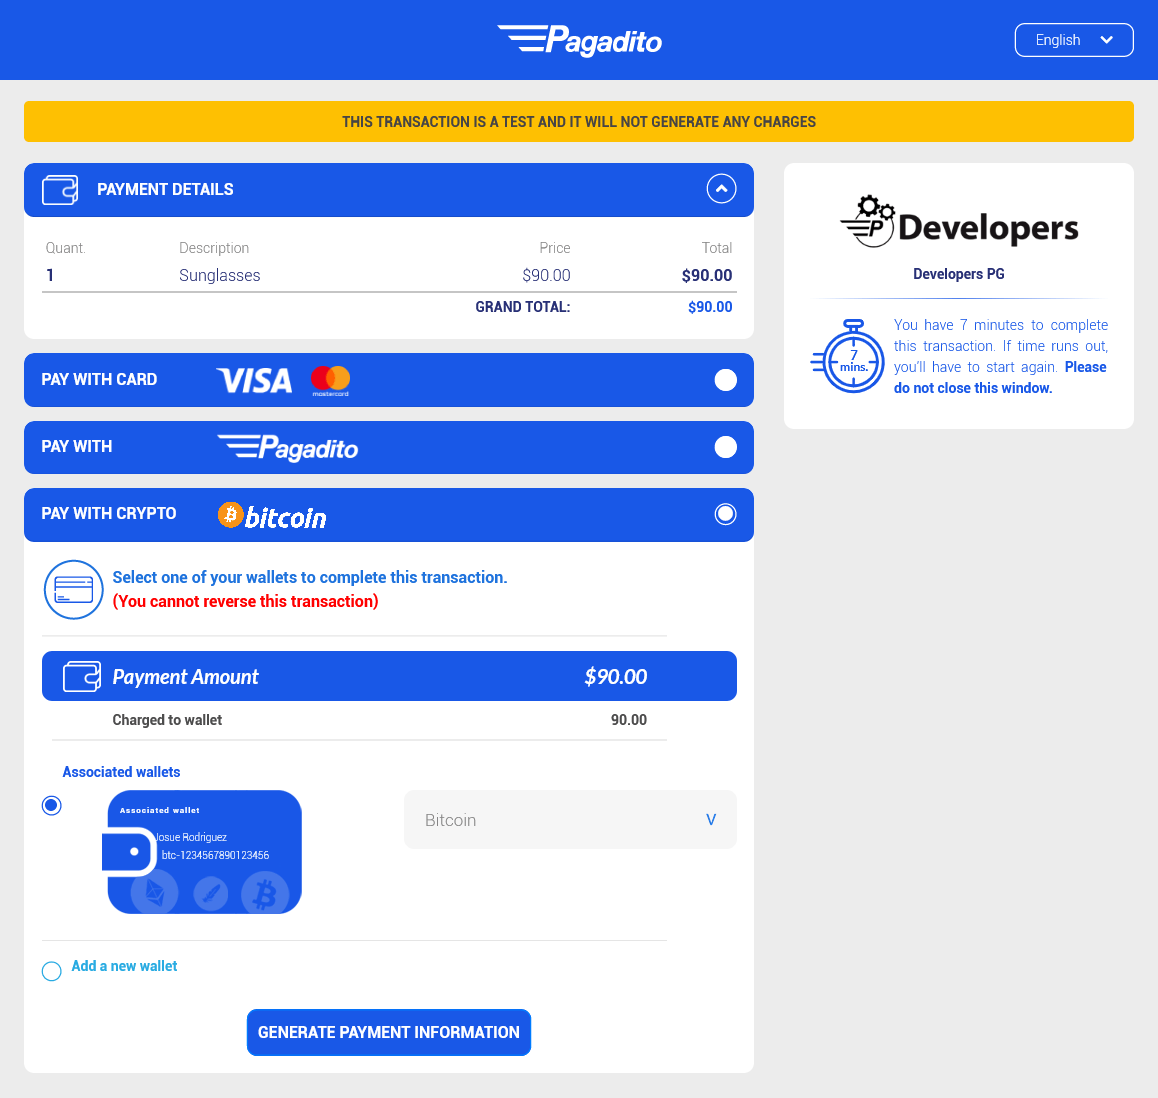 Payment notification sent to the customer and merchant.